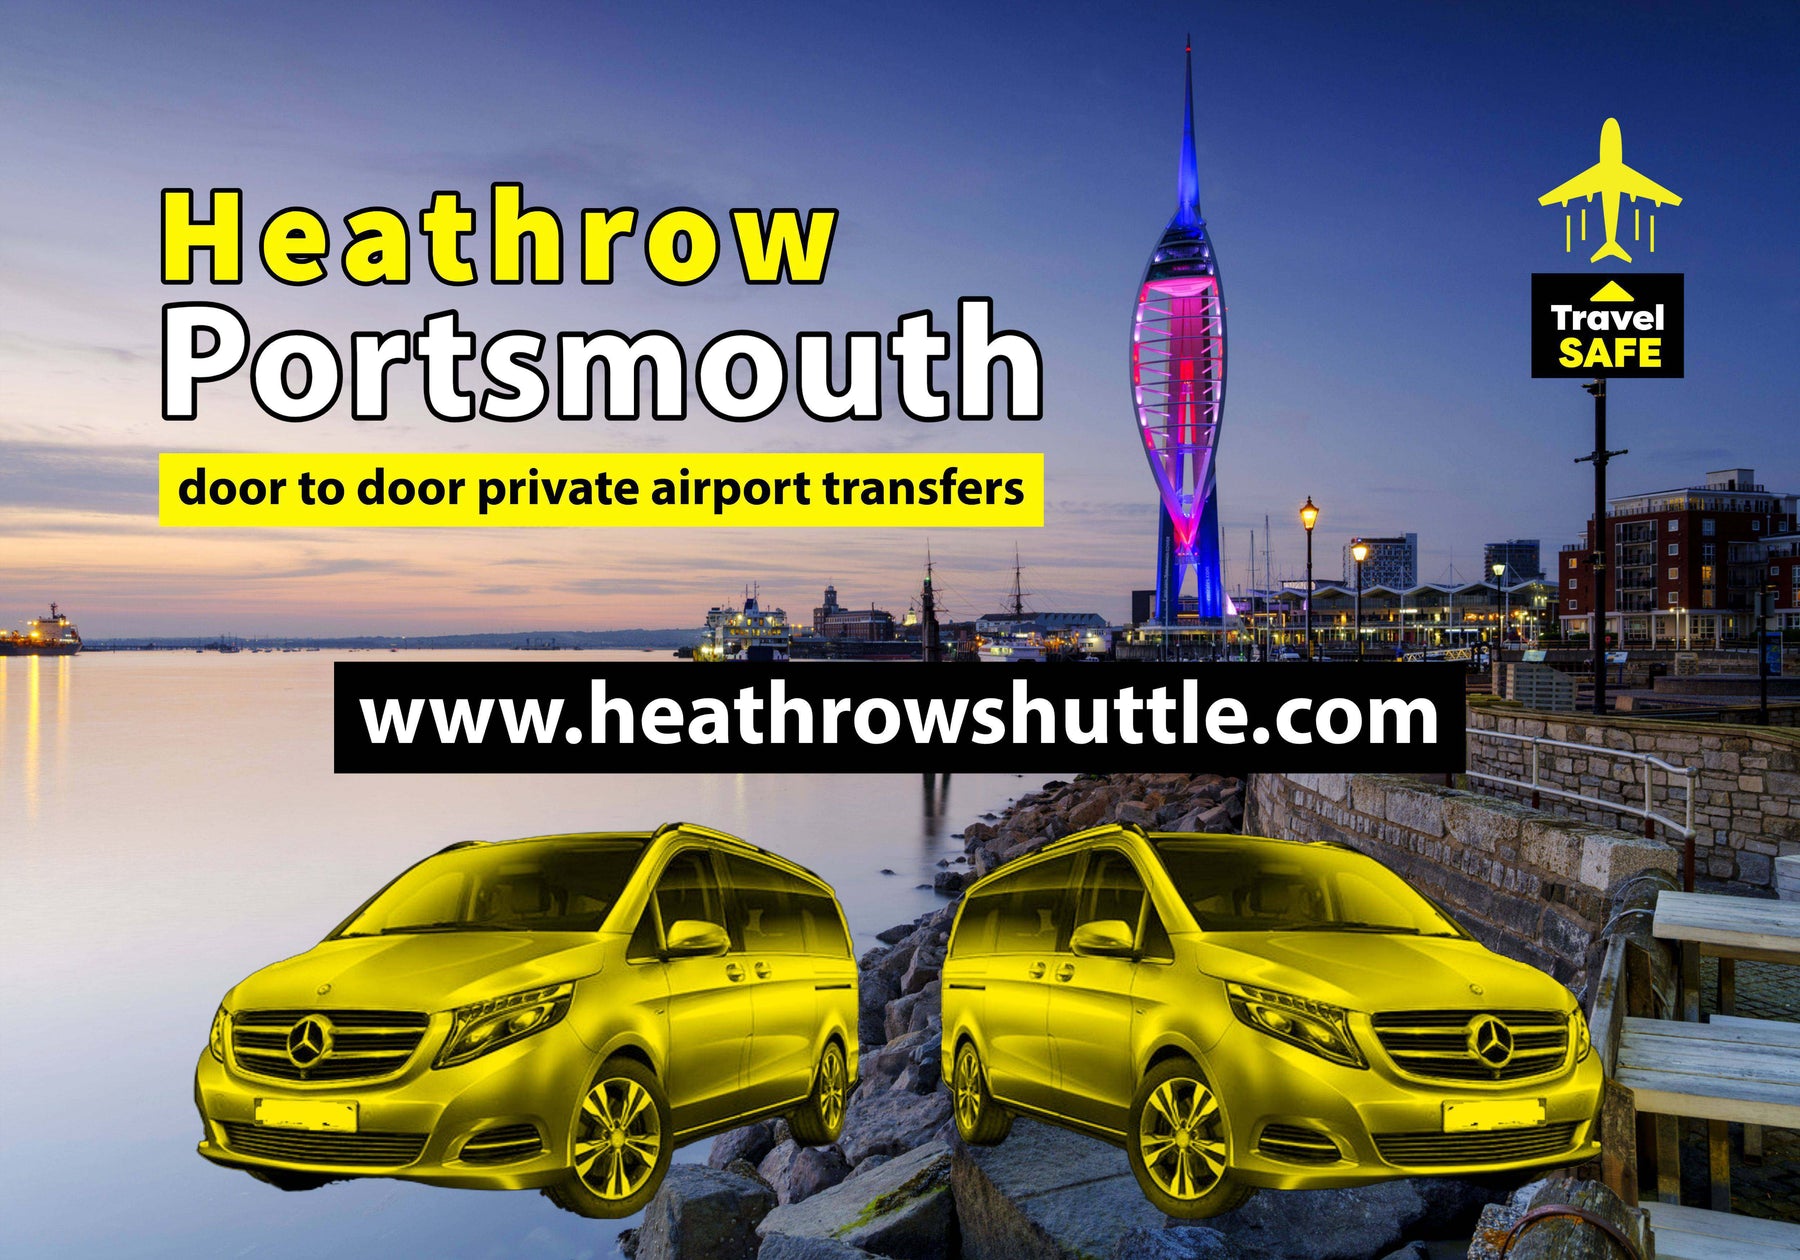 Portsmouth taxi to heathrow airport